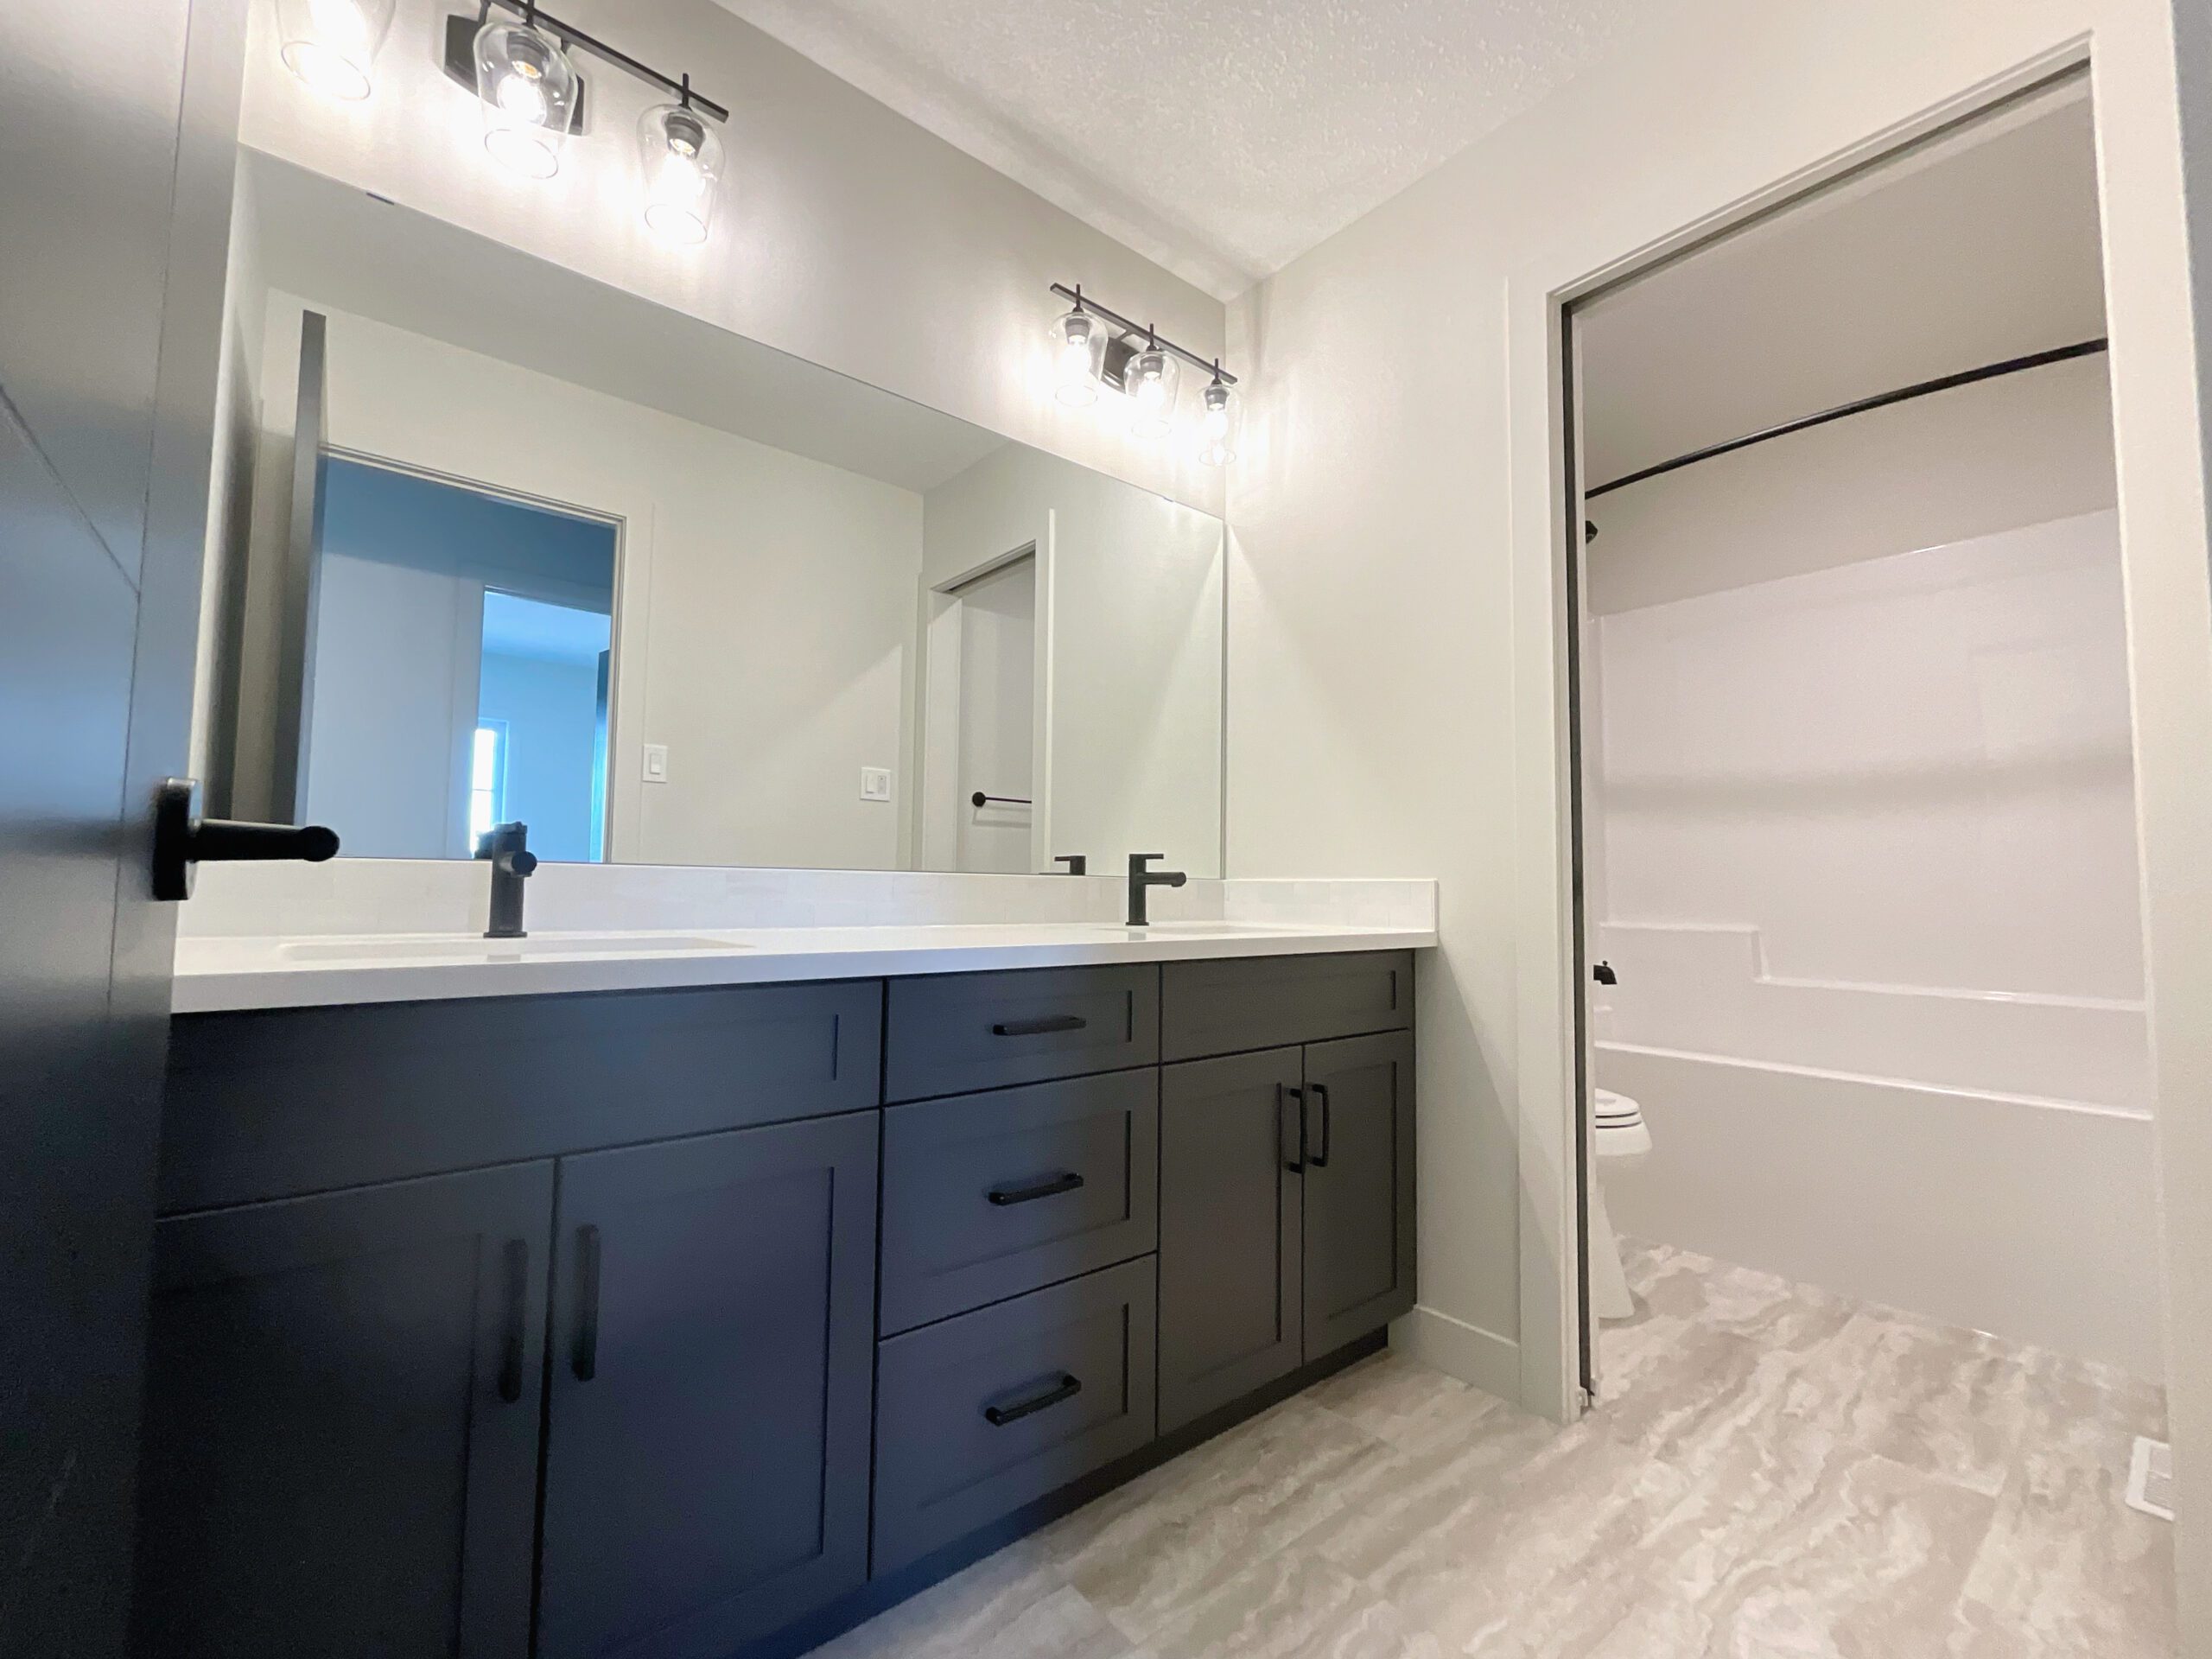 A family bathroom with a large mirror and double sinks with seperate water closet with toilet and combination tub shower.